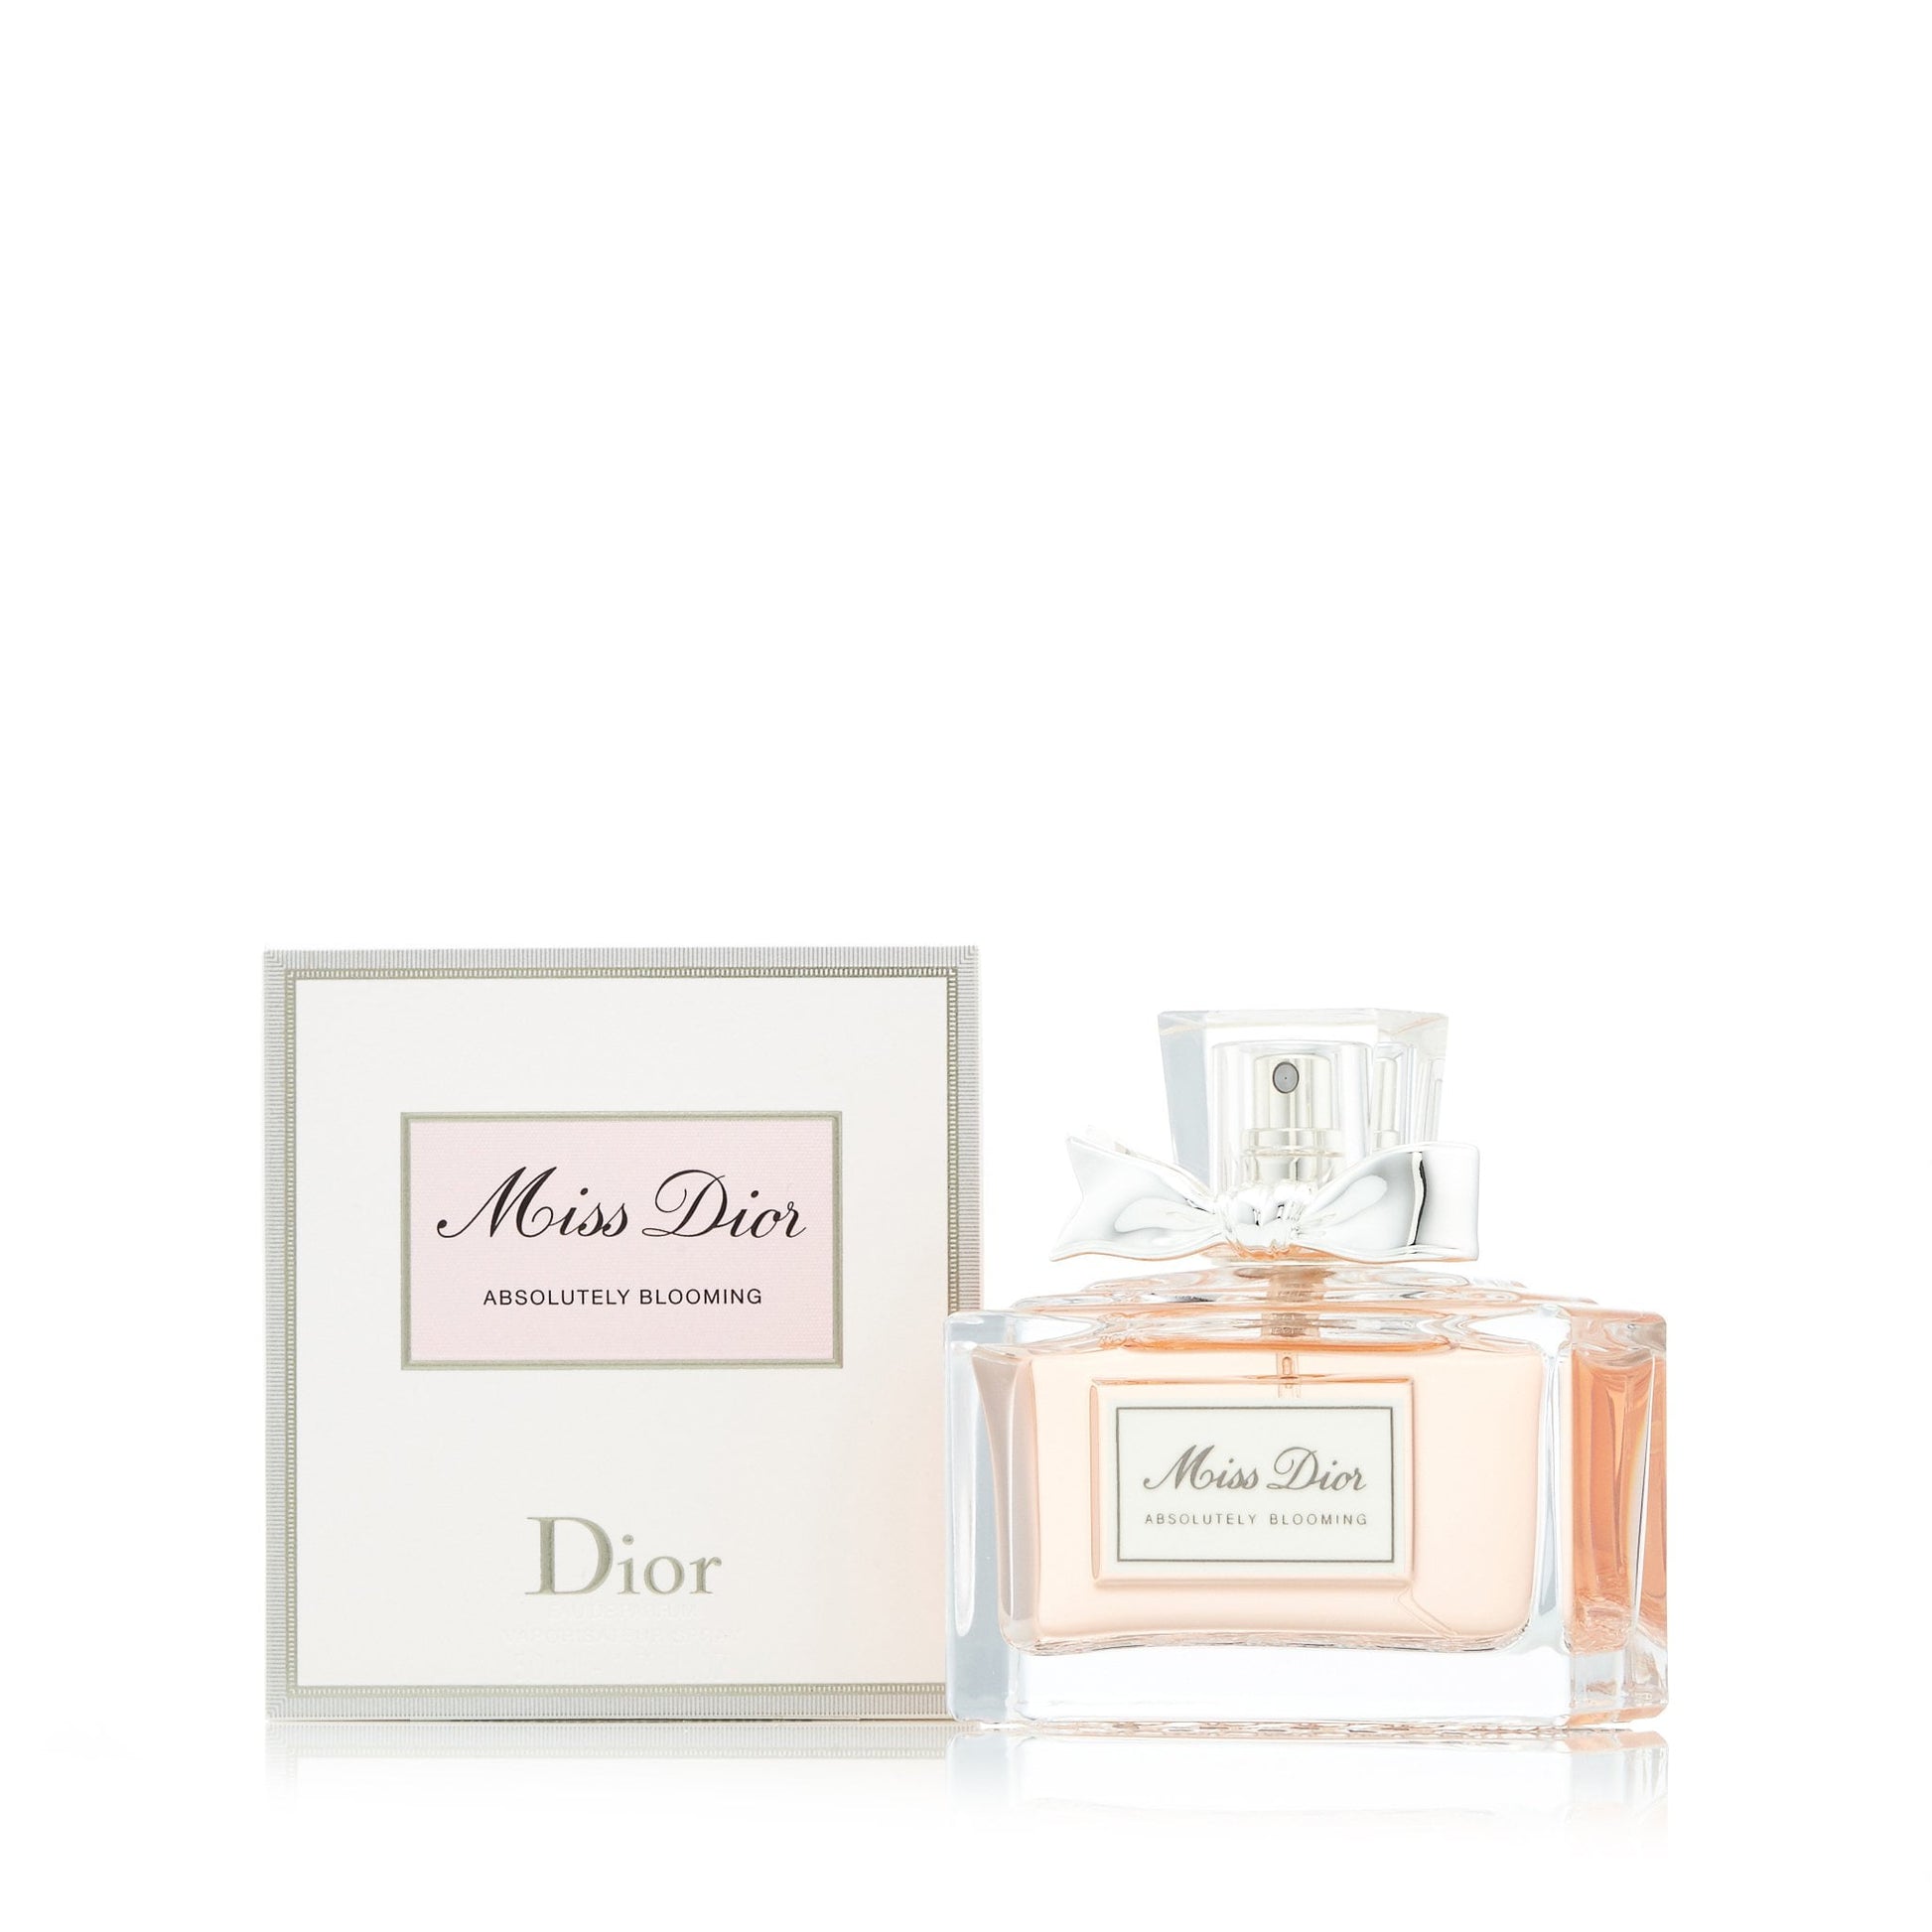 Miss Dior Absolutely Blooming Eau de Parfum Spray for Women by Dior, Product image 3